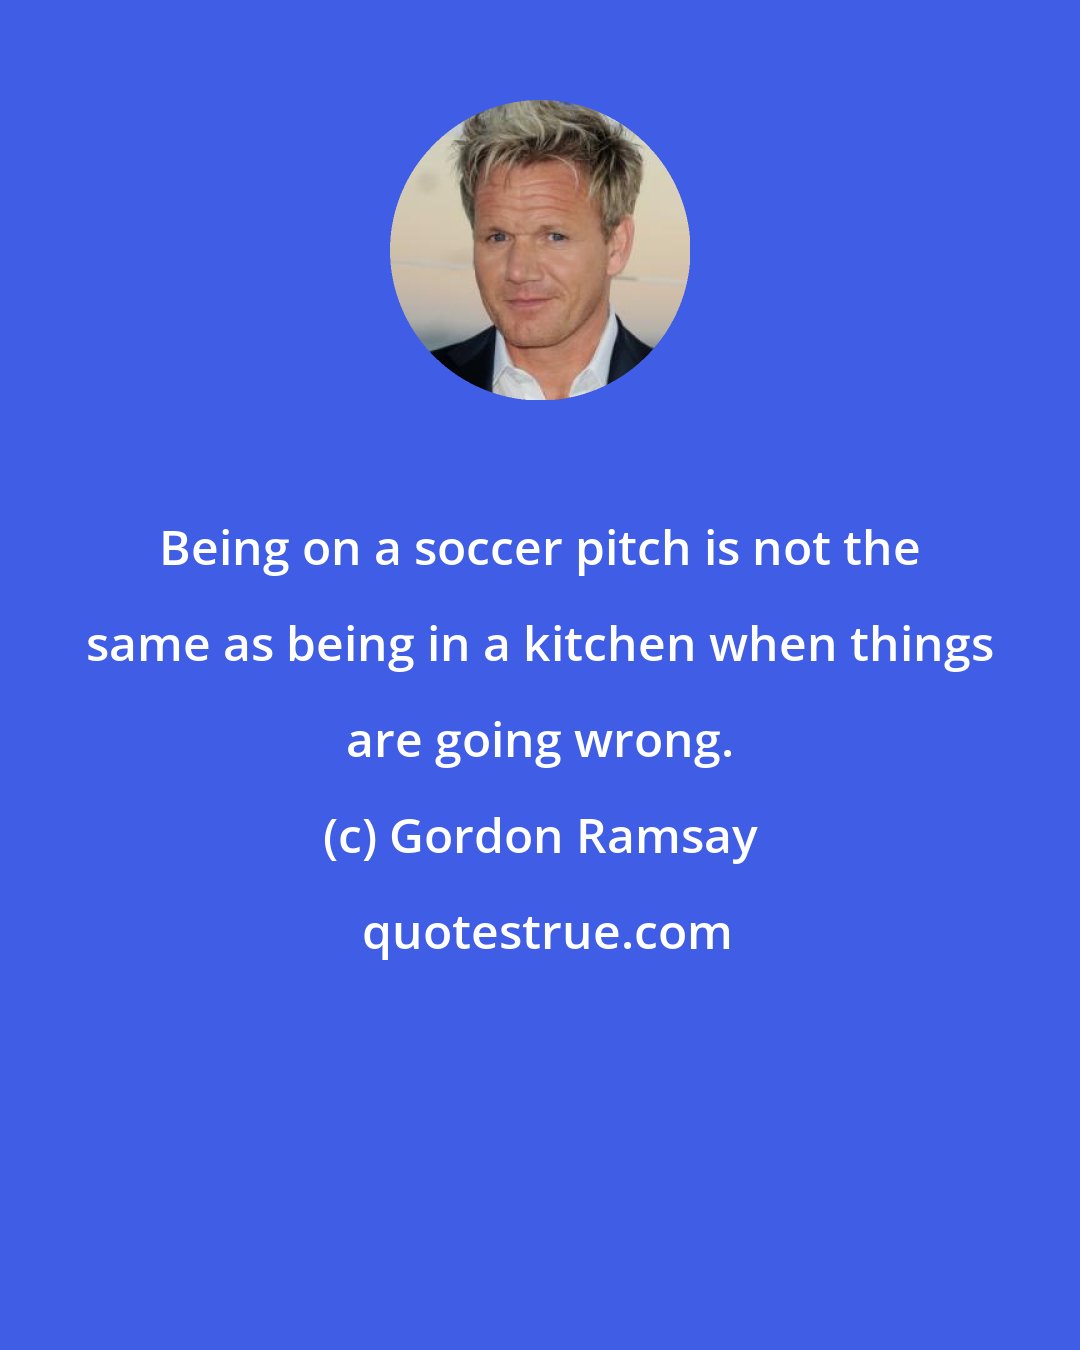 Gordon Ramsay: Being on a soccer pitch is not the same as being in a kitchen when things are going wrong.